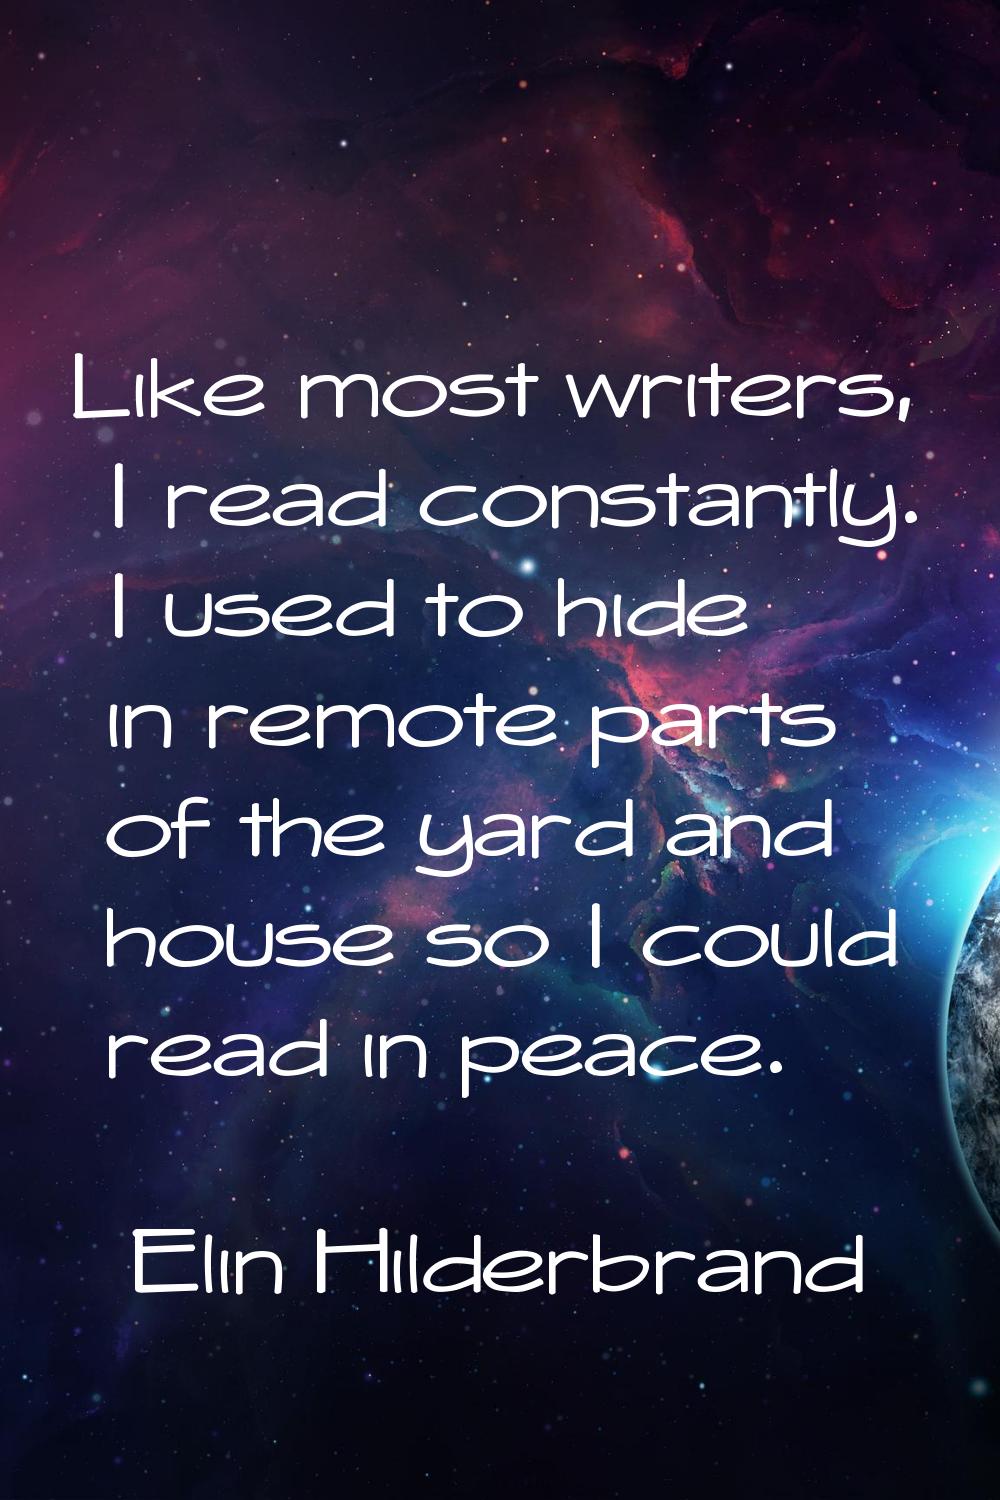 Like most writers, I read constantly. I used to hide in remote parts of the yard and house so I cou